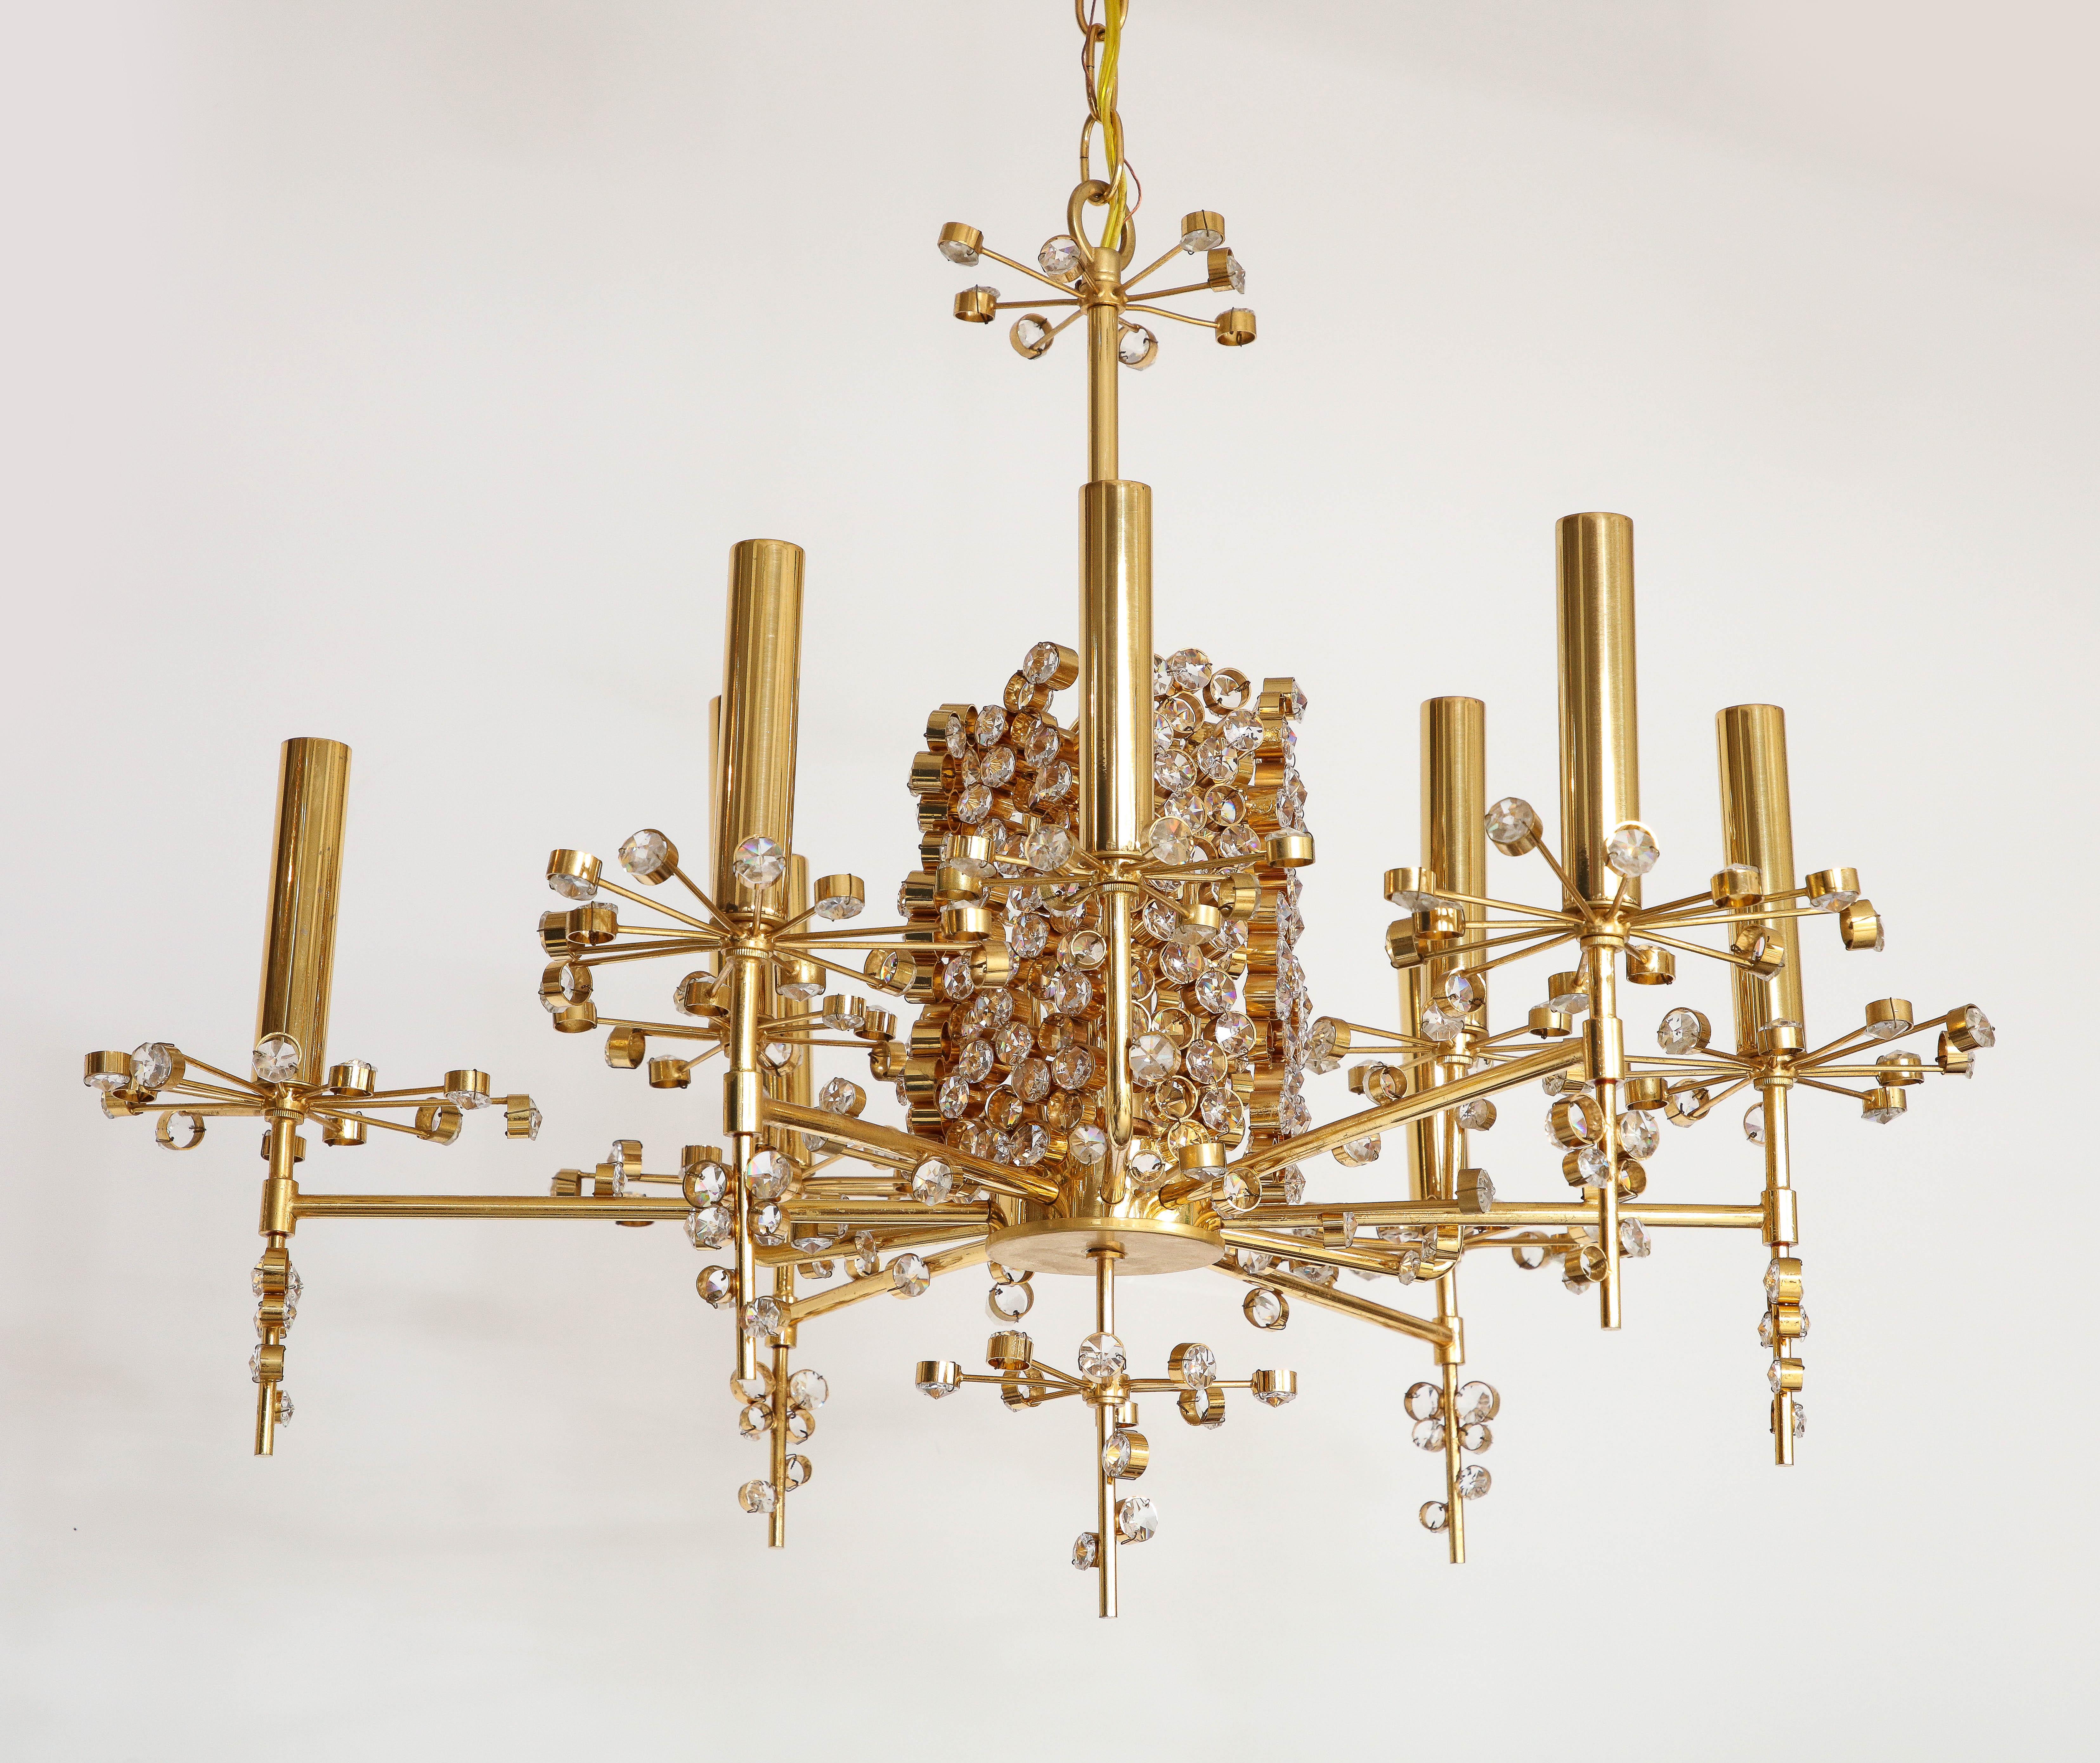 A J. & L. Lobmeyr nine light chandelier designed by Hans Harald Rath with a central cylindrical body encrusted with faceted crystals each encased in brass from which nine arms orbit the center adorned with individual spokes of brass and